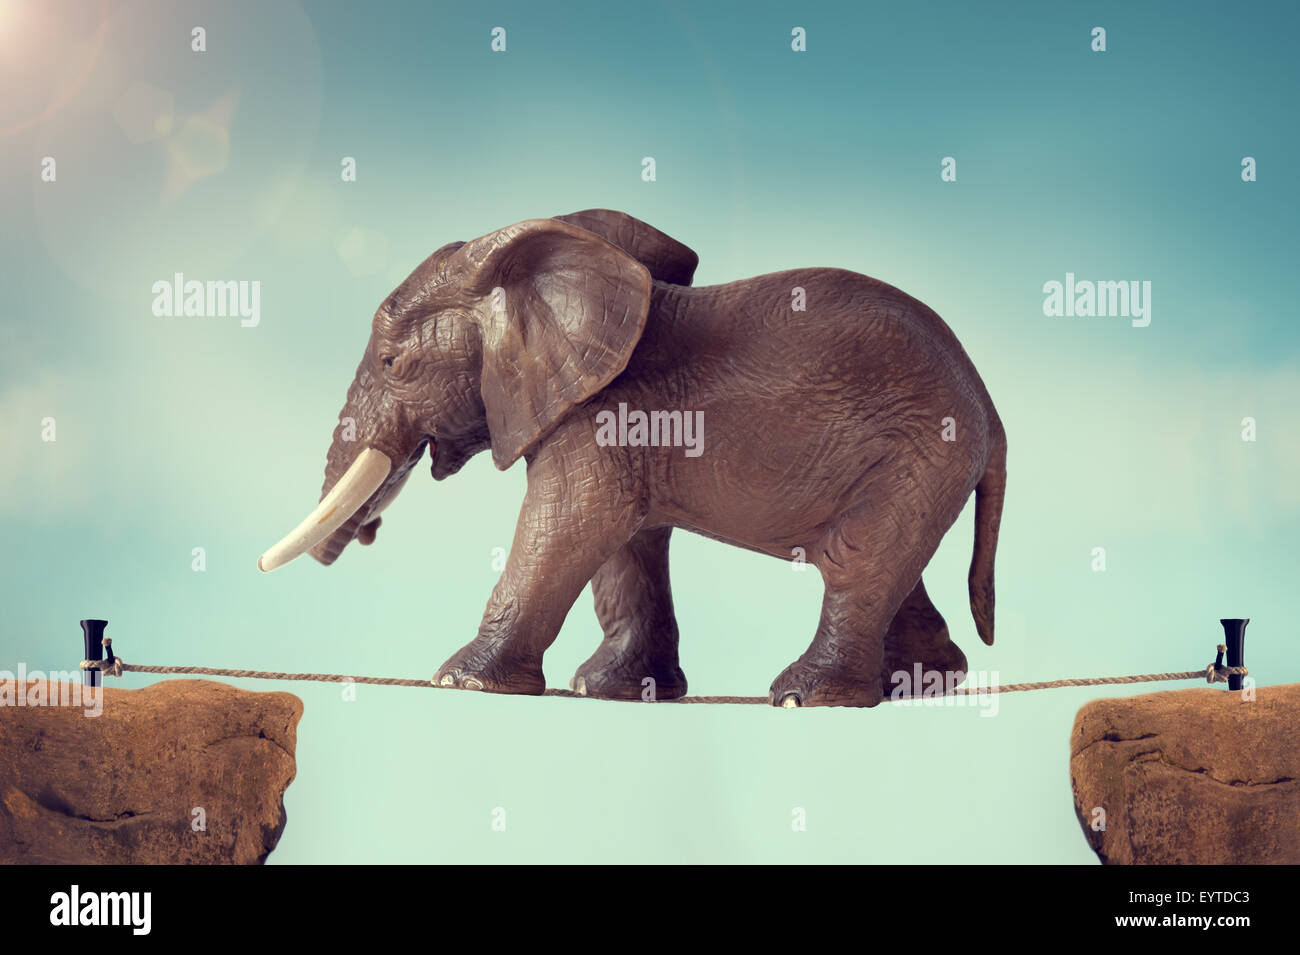 elephant walking on a tightrope Stock Photo